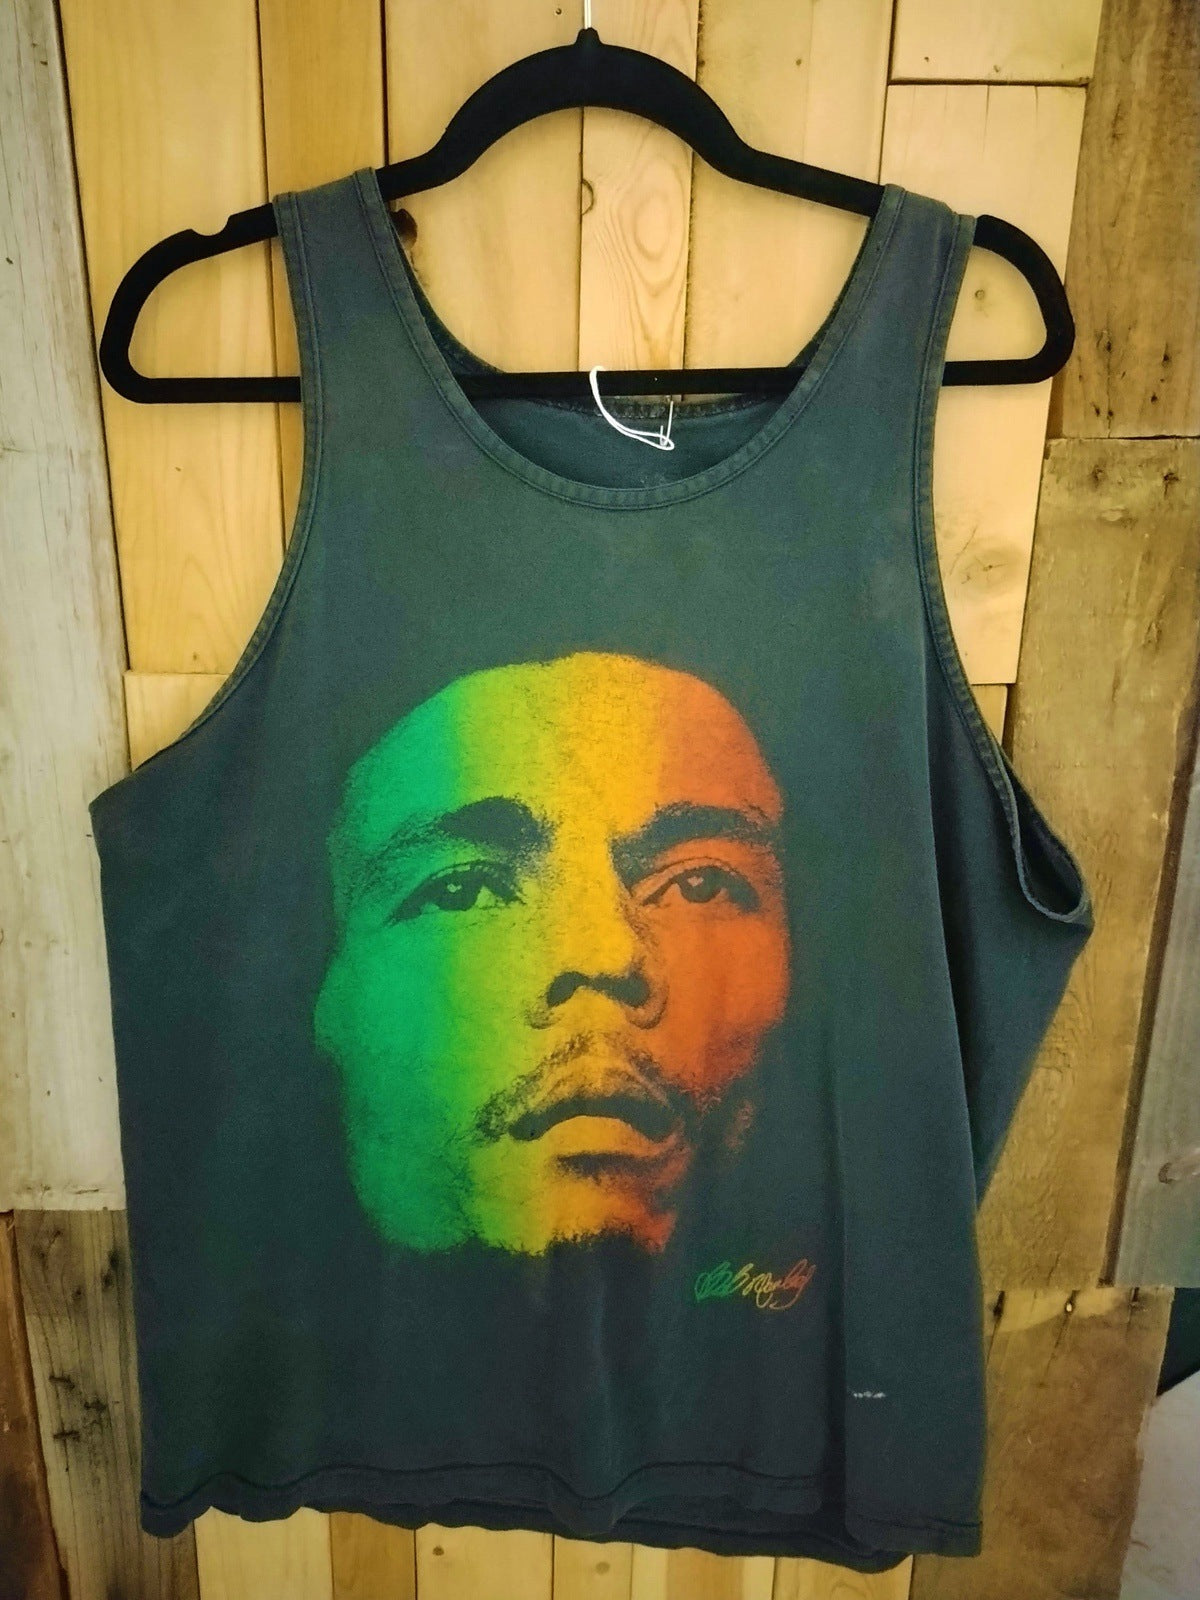 Bob Marley Official Merchandise by Zion Tank Top T Shirt Size Large As Is- Small Stain